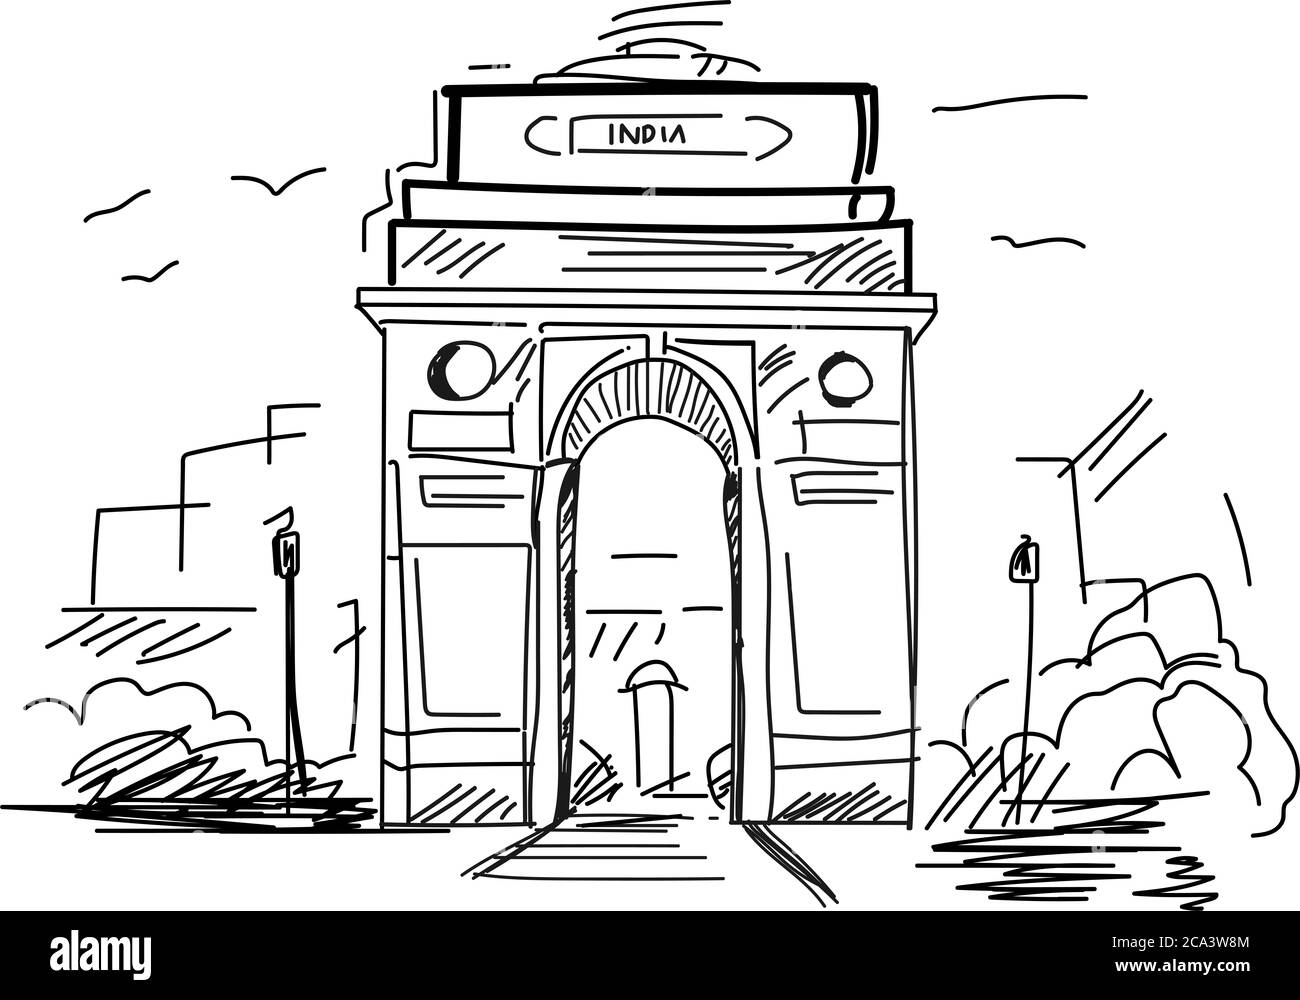 Hand drawn pencil sketch of India Gate at New Delhi in vector illustration. Triumphal archway. Iconic war memorial. Flat. Graphic. Design. 3D. Art. Stock Photo